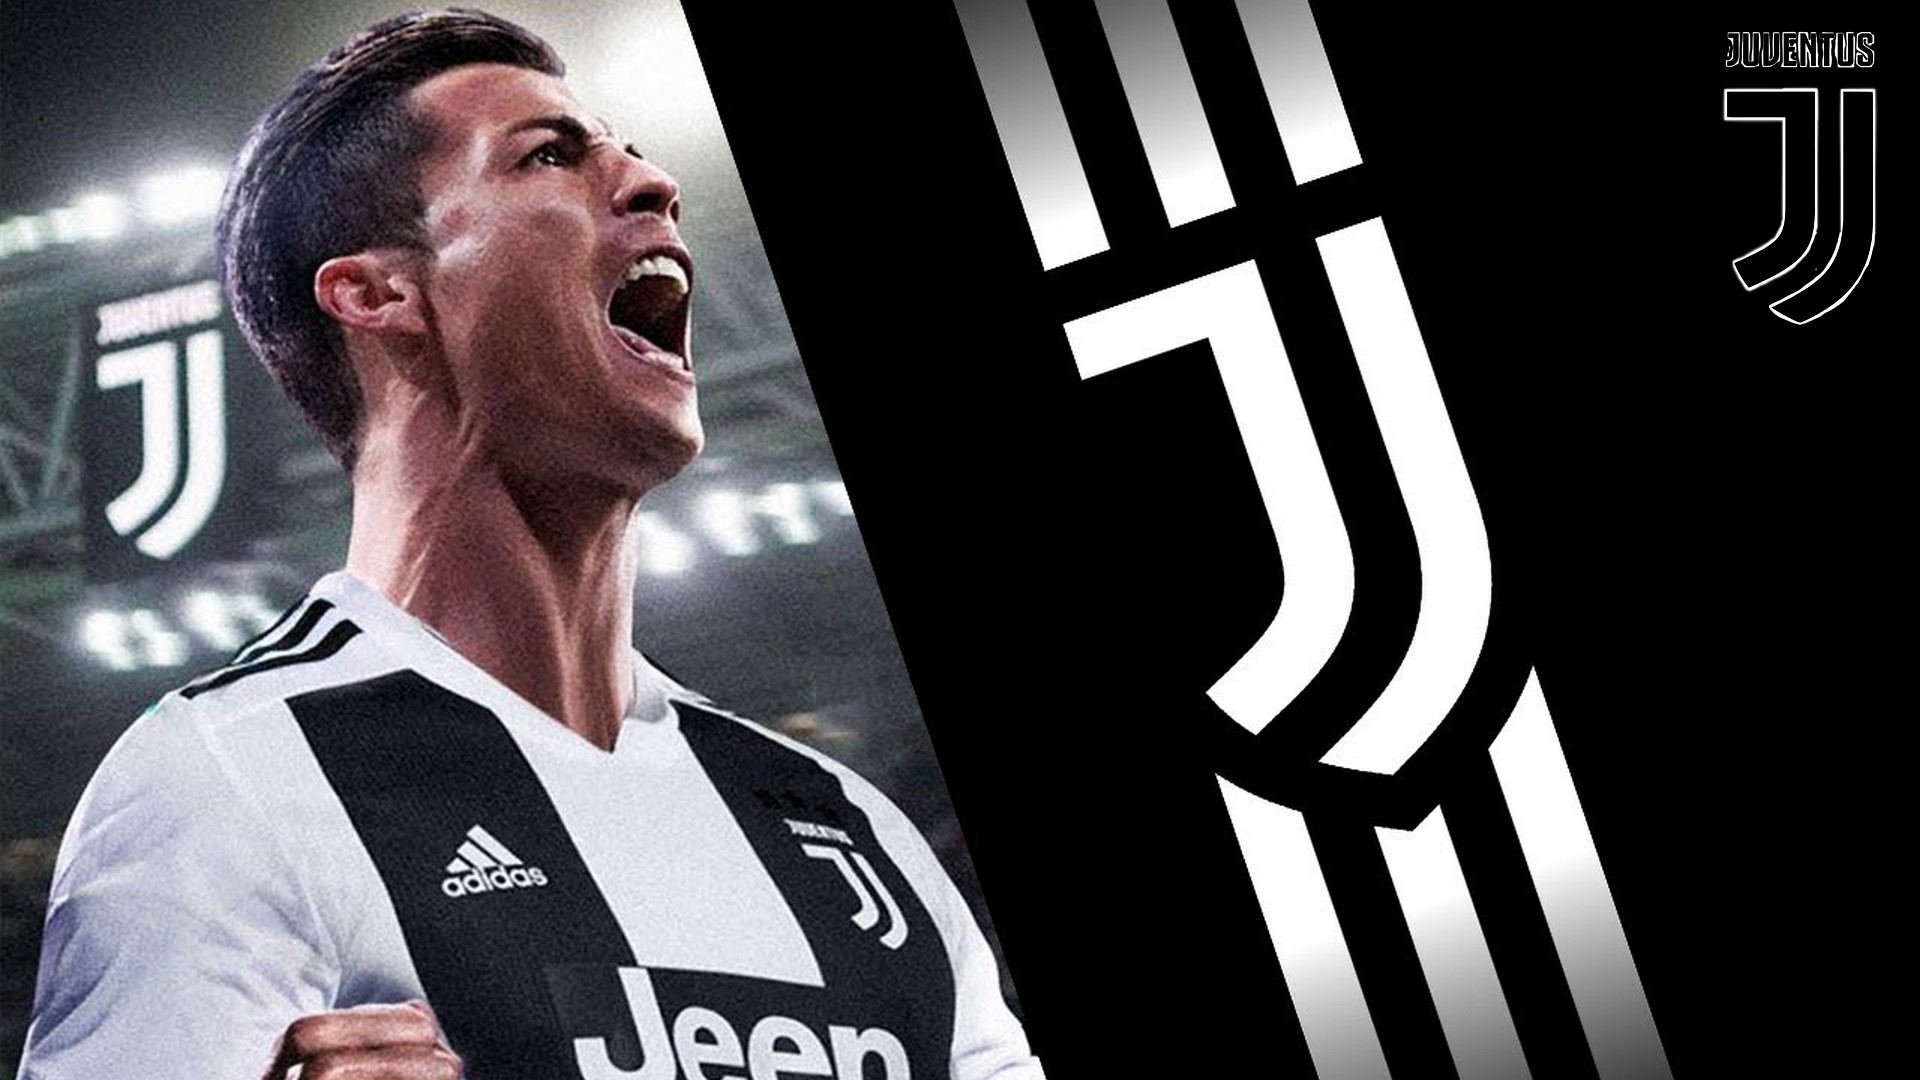 Cristiano Ronaldo Juve Wallpaper HD with resolution 1920x1080 pixel. You can make this wallpaper for your Mac or Windows Desktop Background, iPhone, Android or Tablet and another Smartphone device